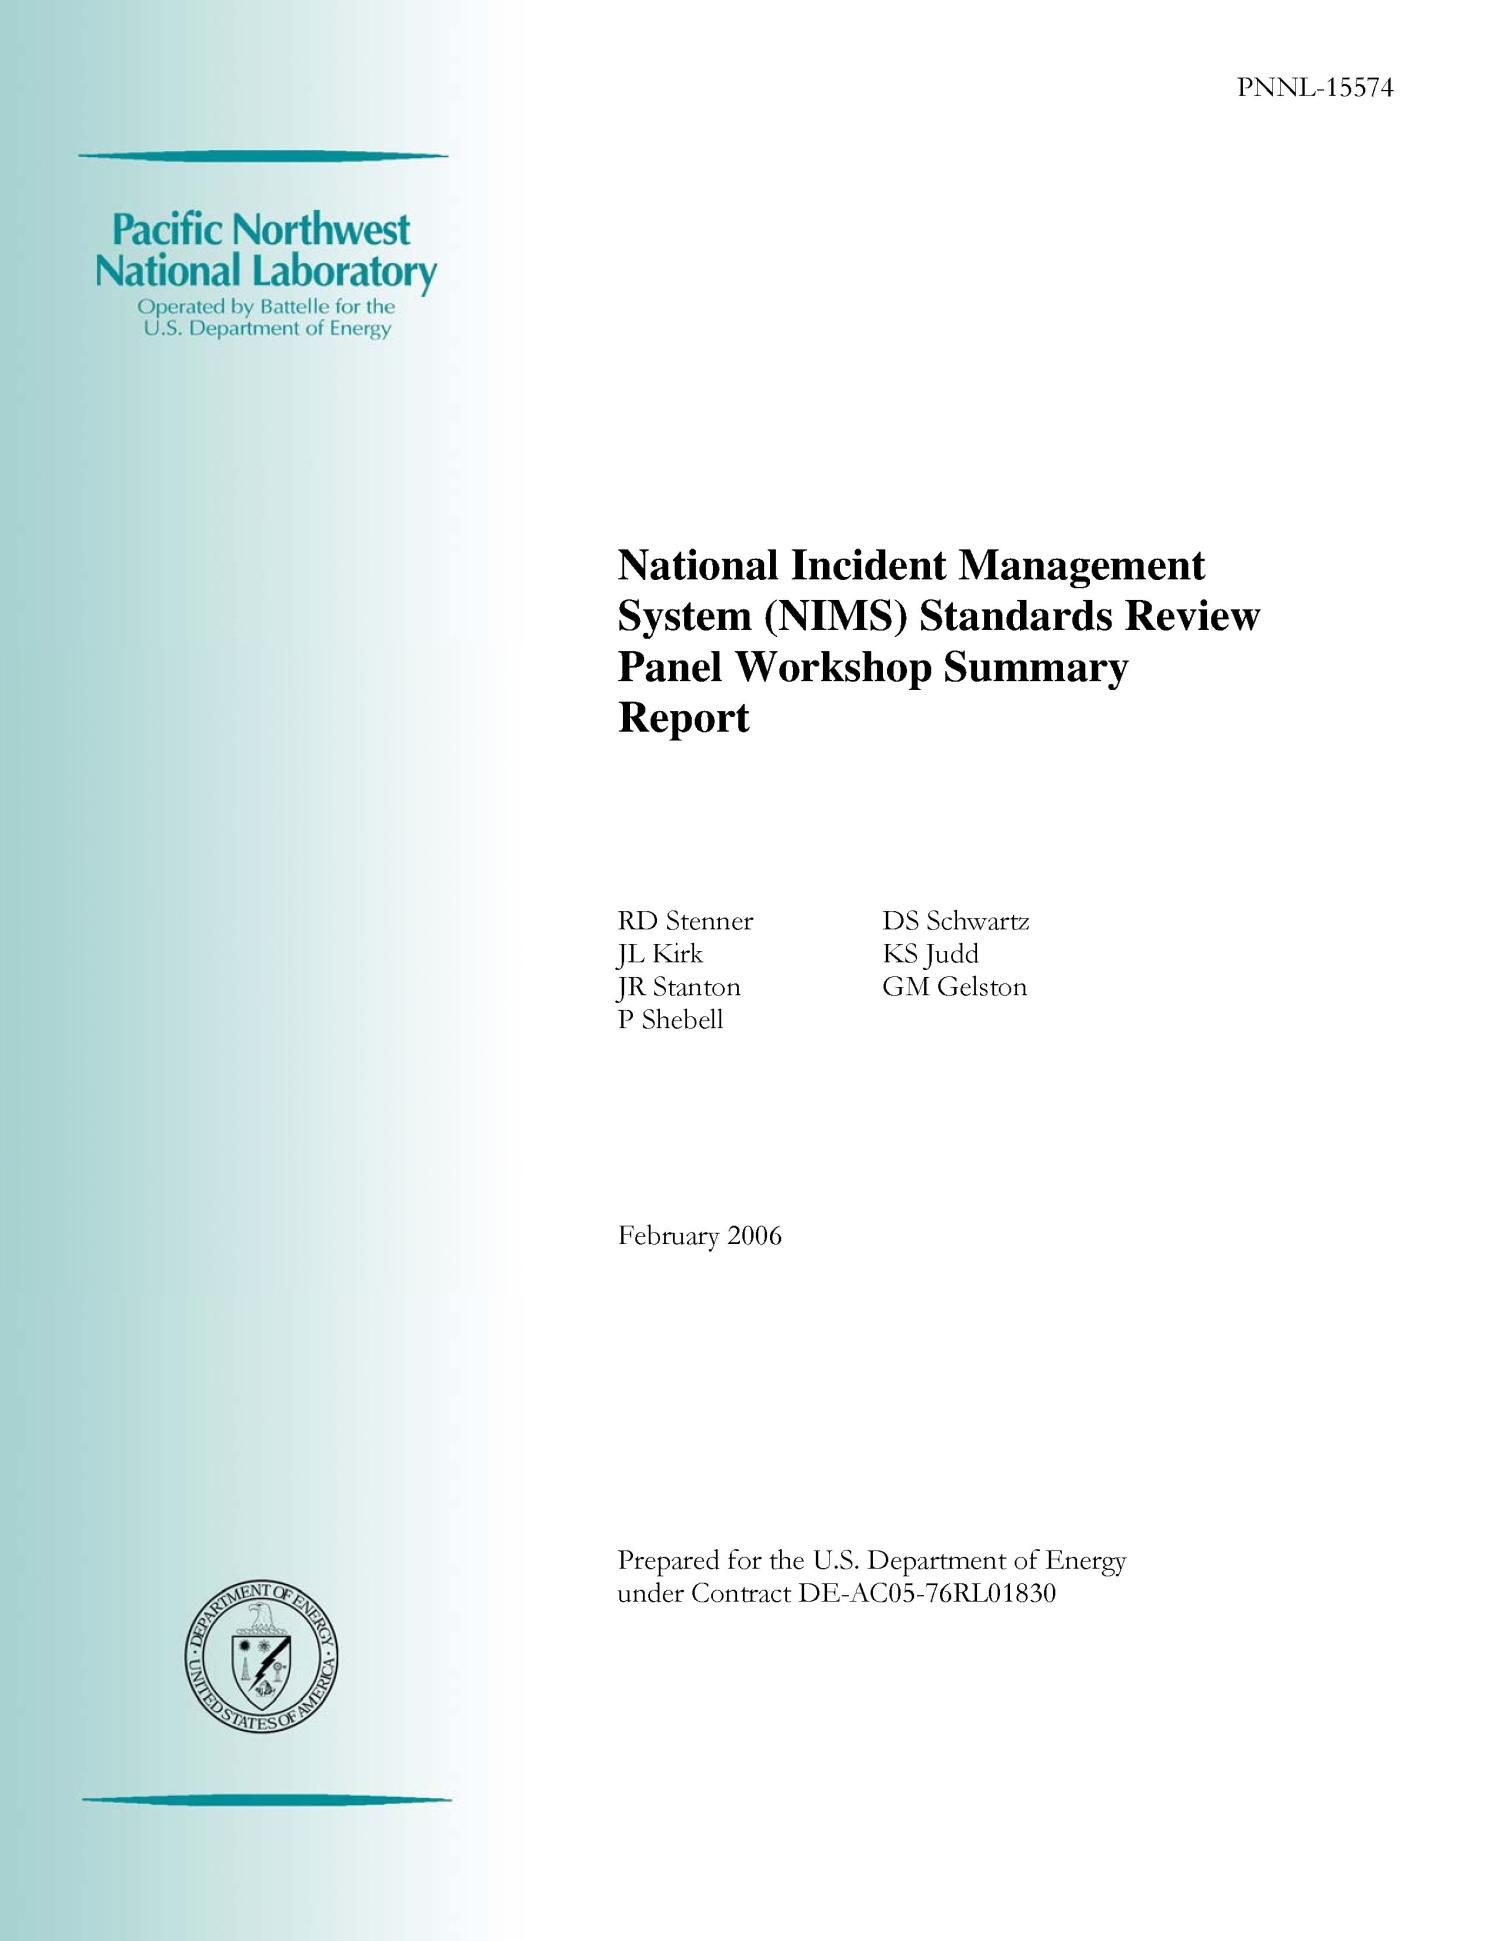 National Incident Management System (NIMS) Standards Review Panel Workshop  Summary Report - UNT Digital Library